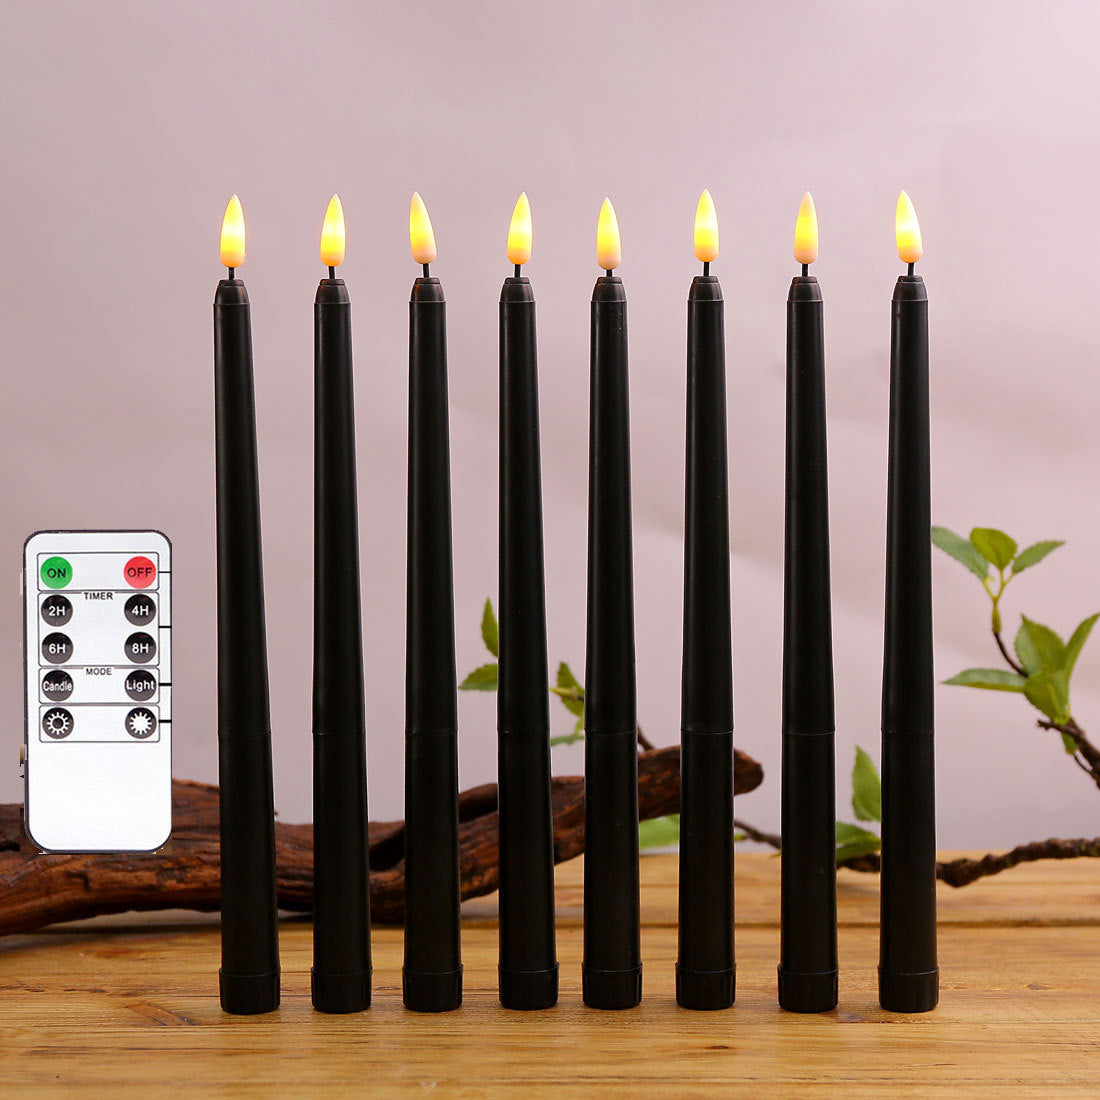 6 Candles + 1 Remote Control Black Shell Bullet Remote Control Rod Wax Electronic Candle Light Halloween Decoration